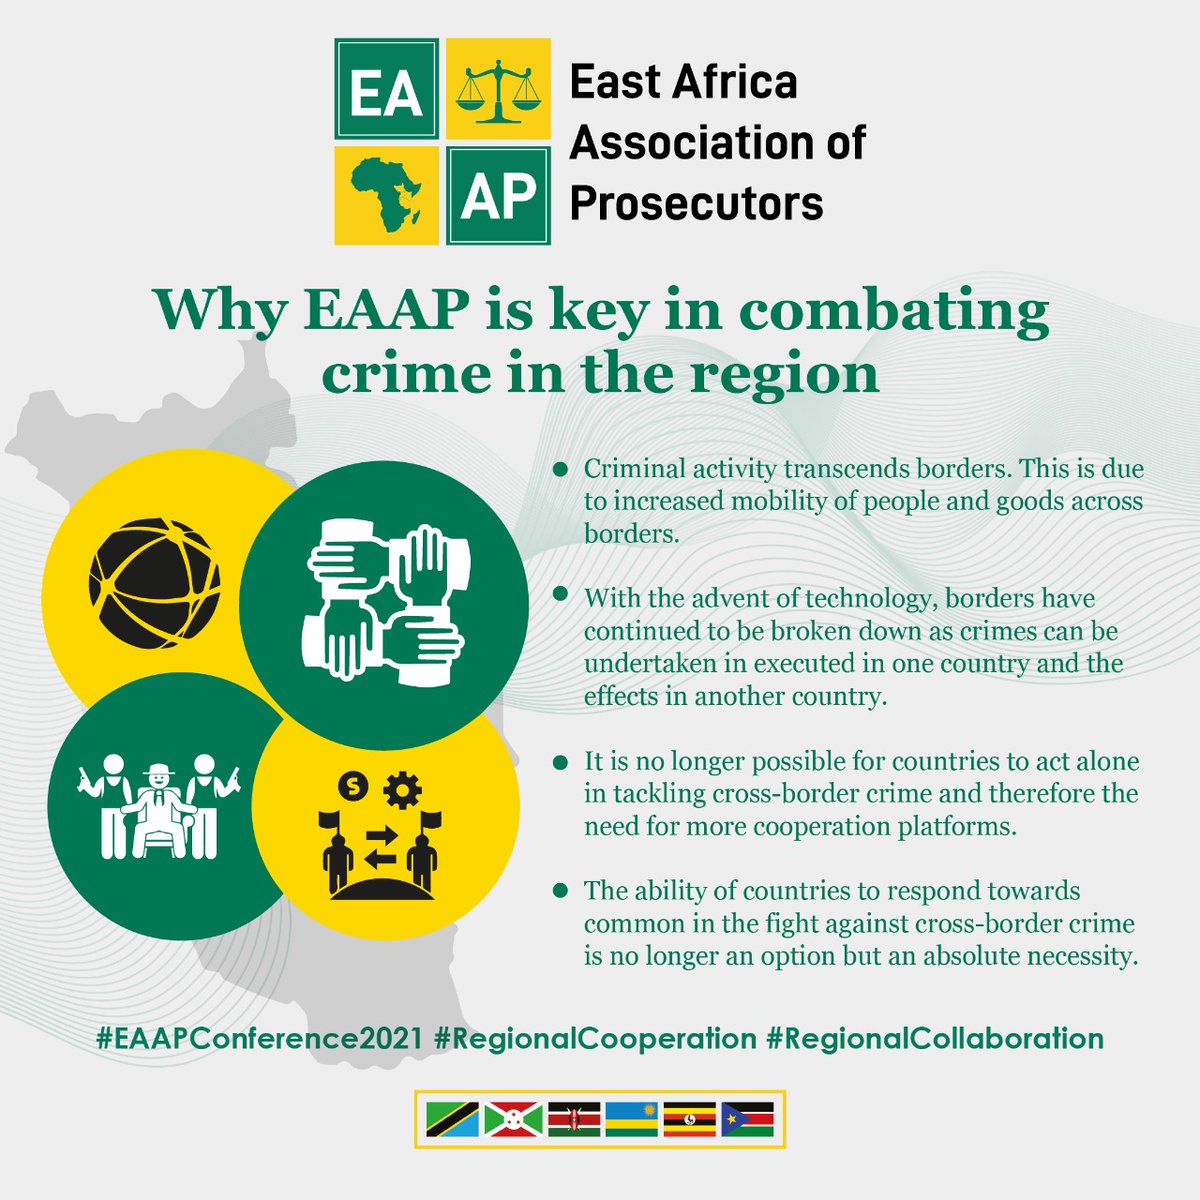 Why the EAAP is key in combating crime in the region. #RegionalCooperation #RegionalCollaboration #EAAPConference2021 #EndWildlifeCrime